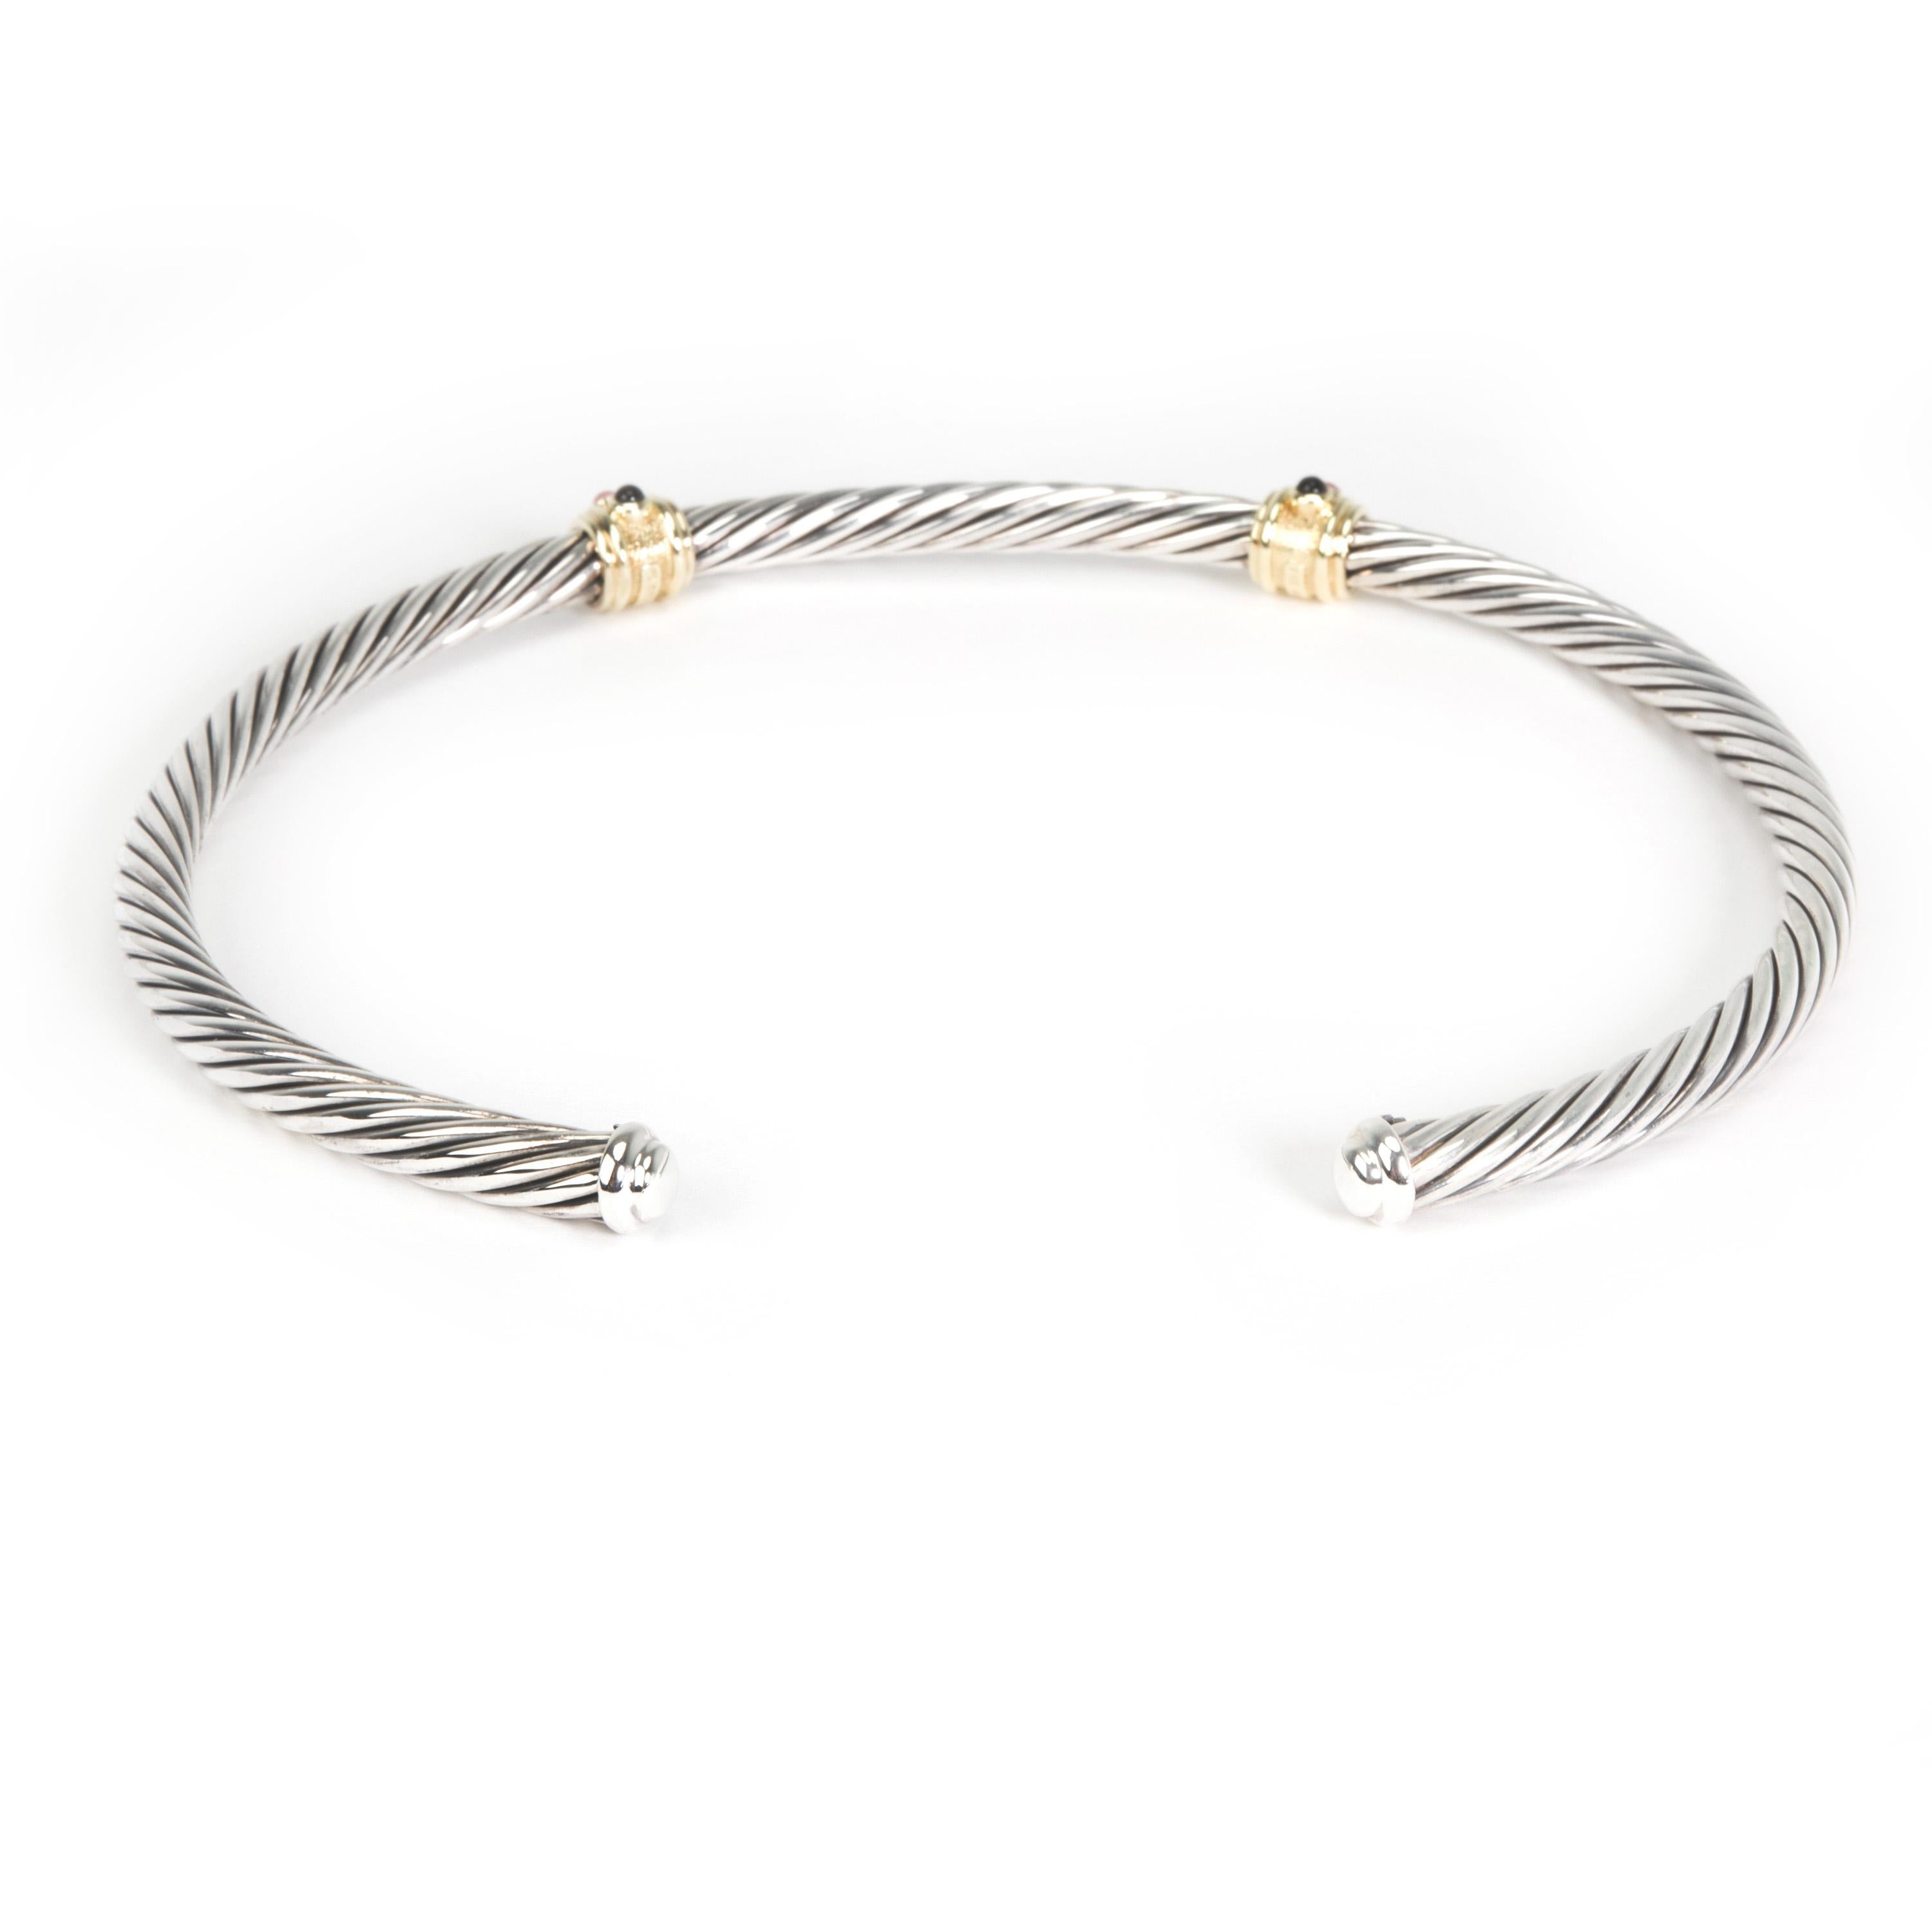 David Yurman Renaissance Cable Choker Necklace in Sterling Silver

PRIMARY DETAILS
SKU: 101014
Listing Title: David Yurman Renaissance Cable Choker Necklace in Sterling Silver
Condition Description: Retails for 2400 USD. In excellent condition and